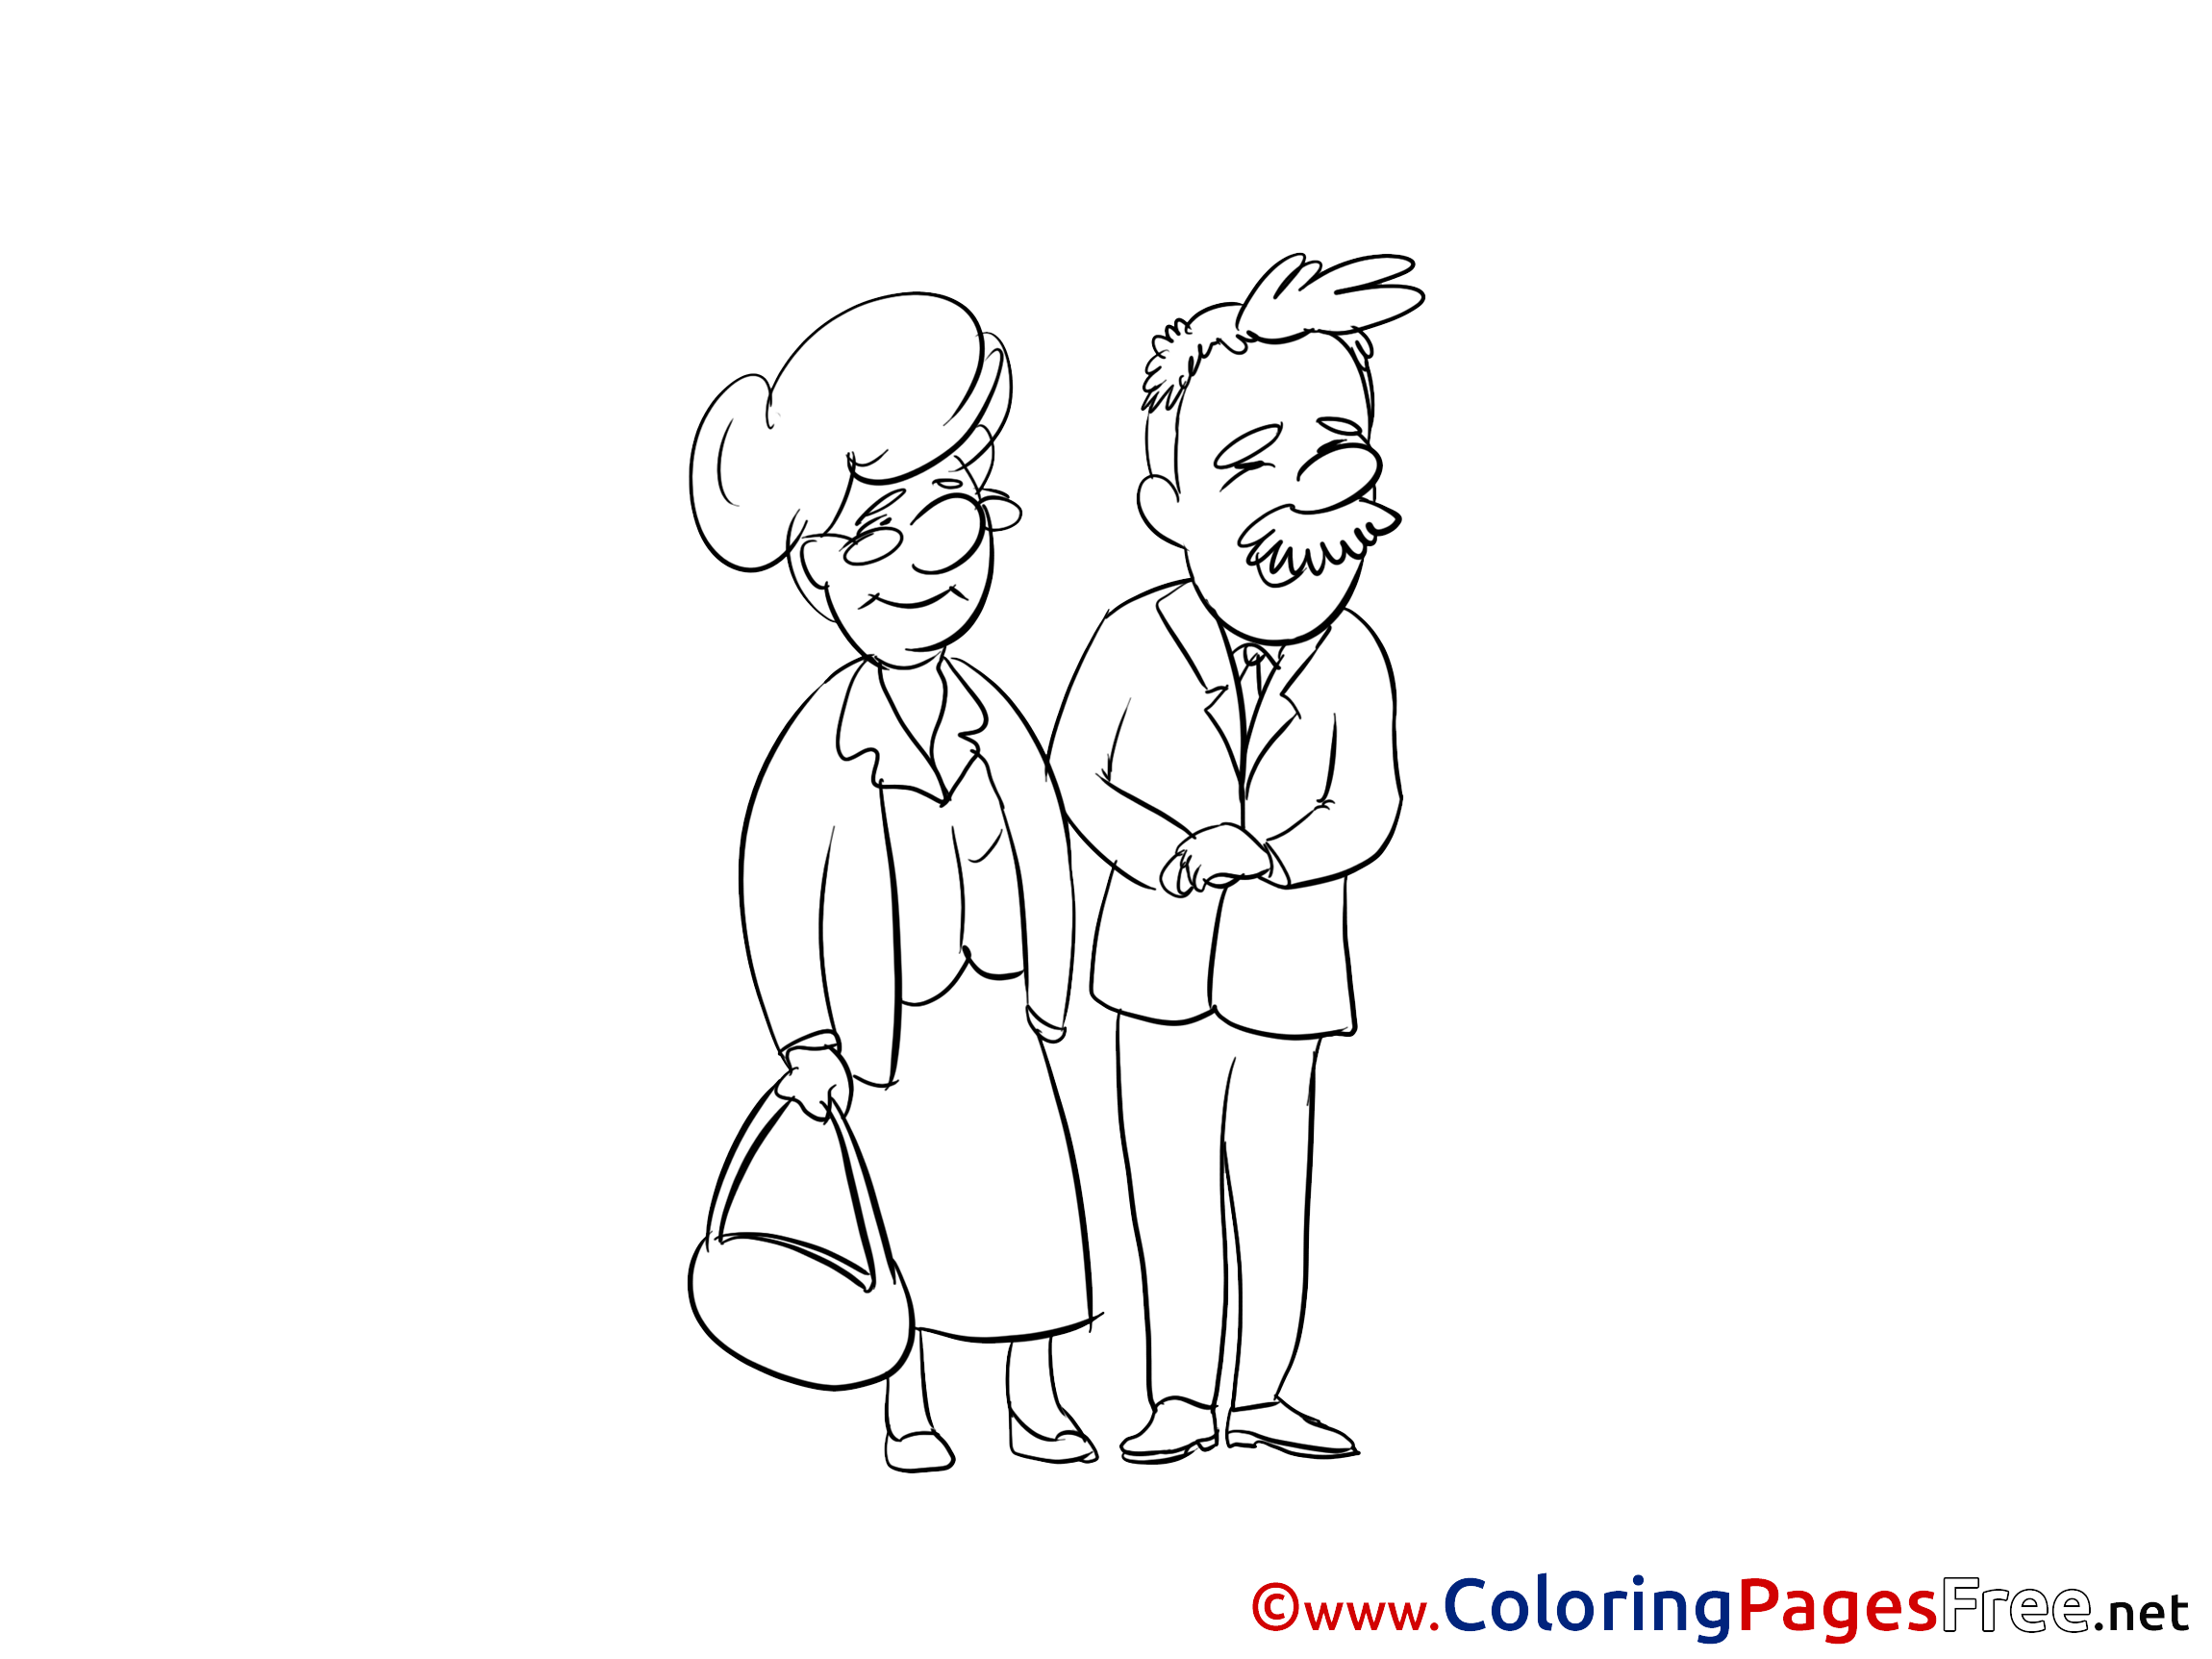 Aged for free Coloring Pages download